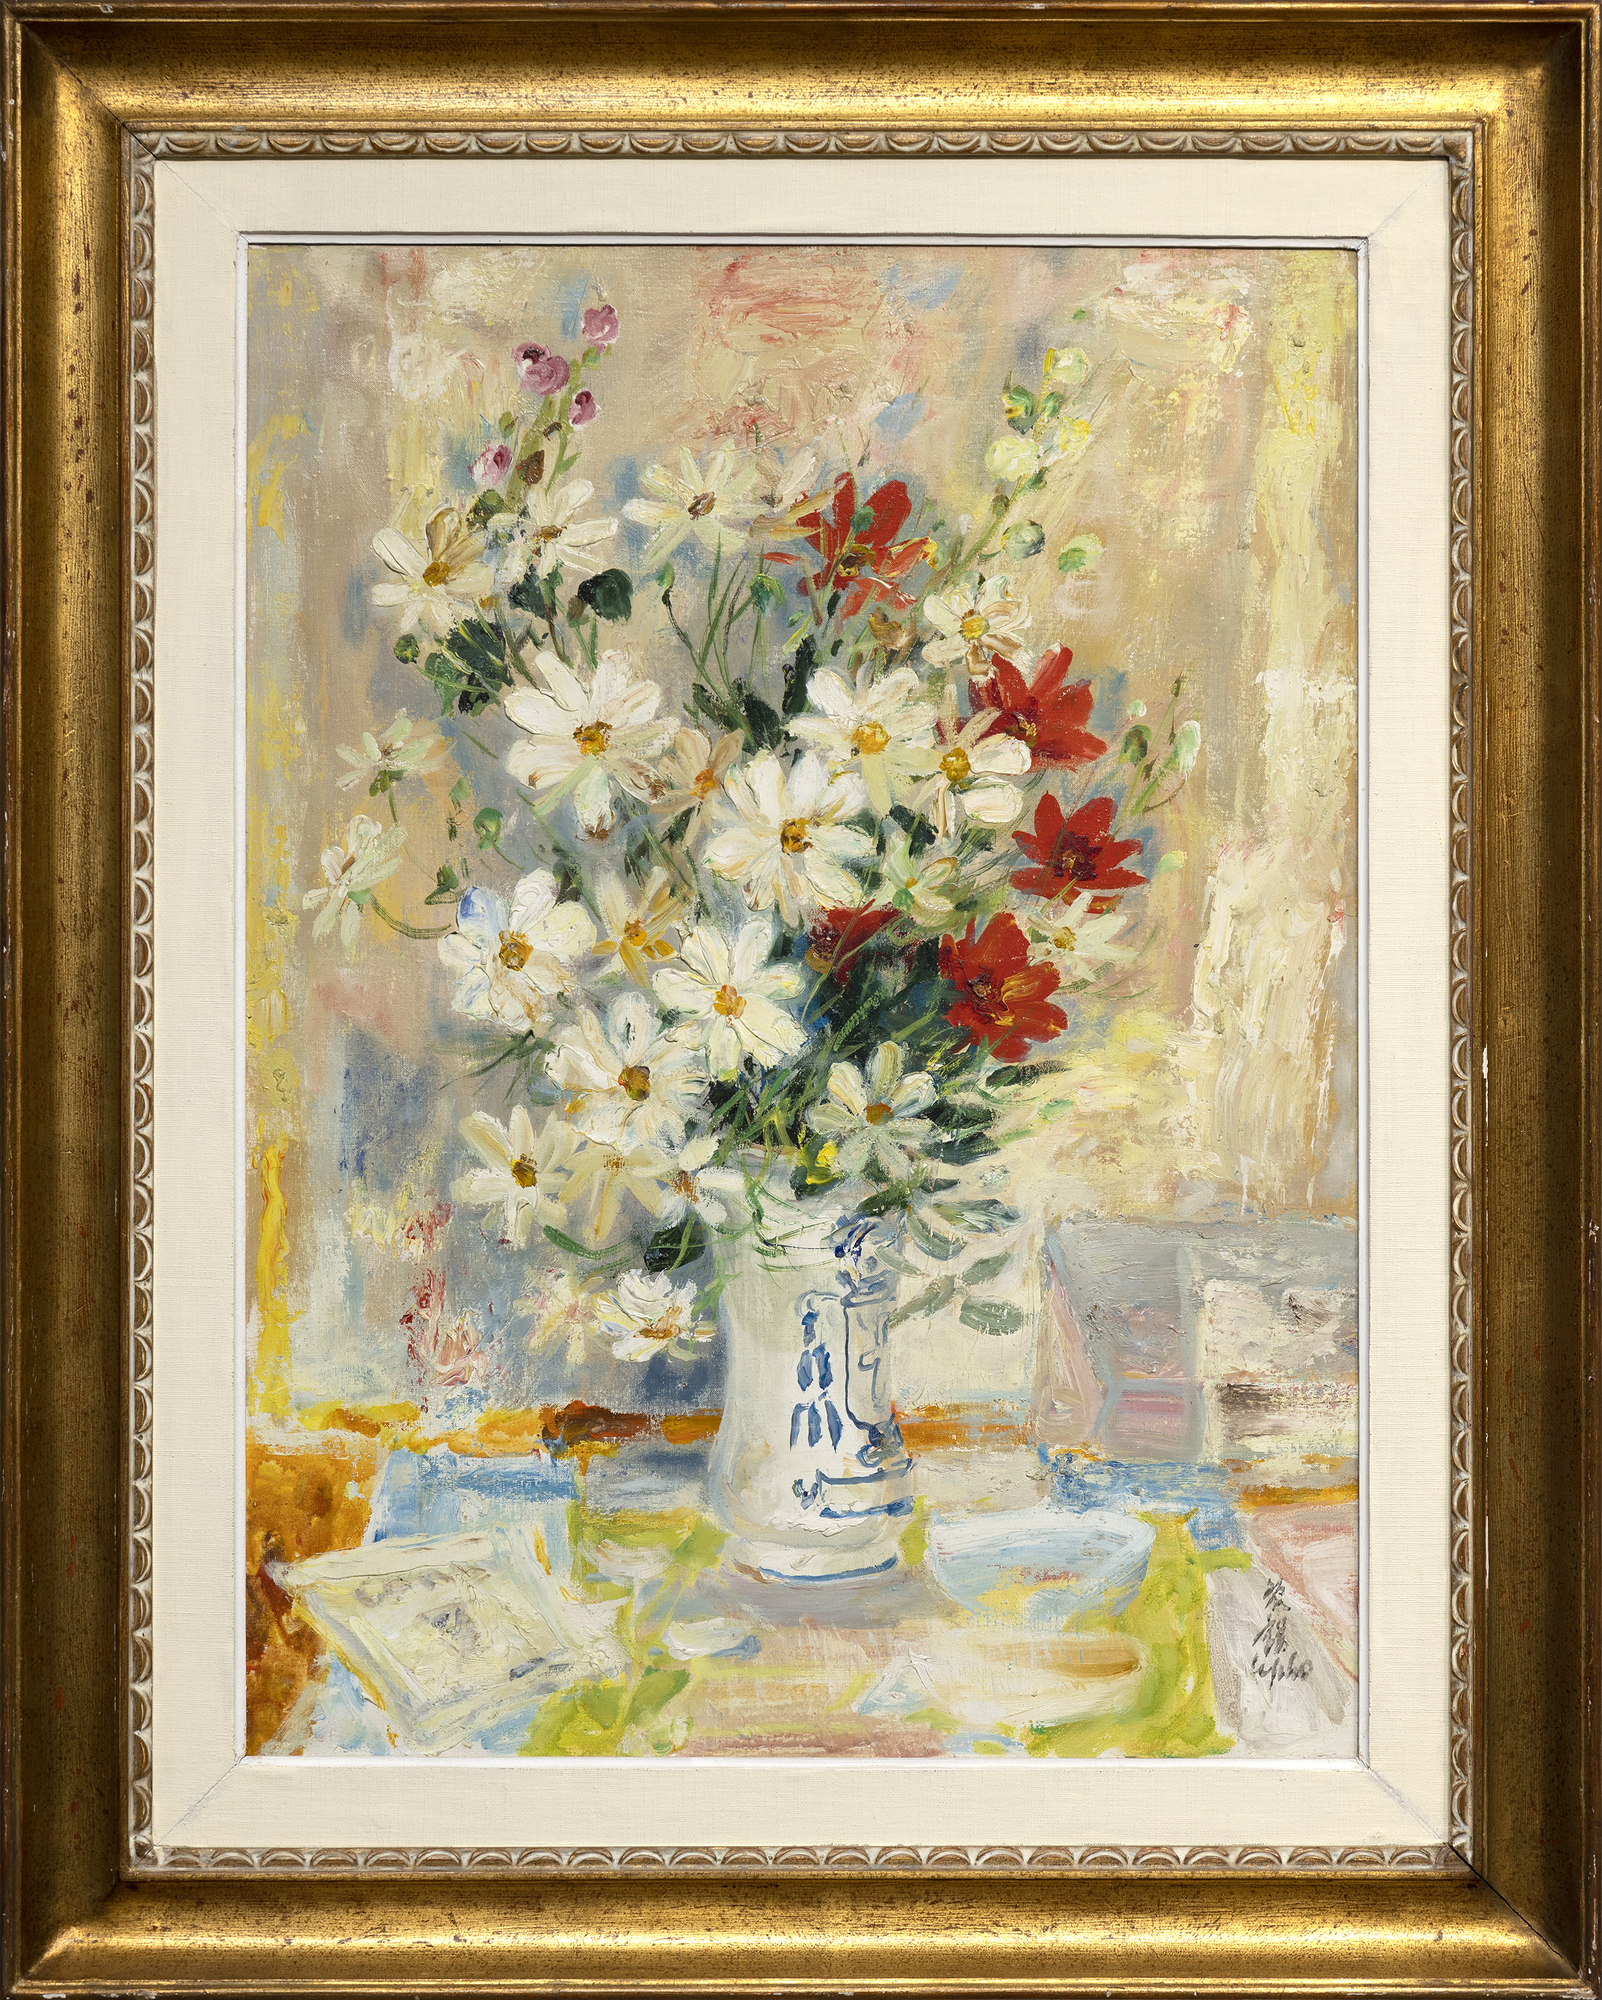 LE PHO - Flowers - oil on canvas - 28 3/4 x 21 1/4 in.